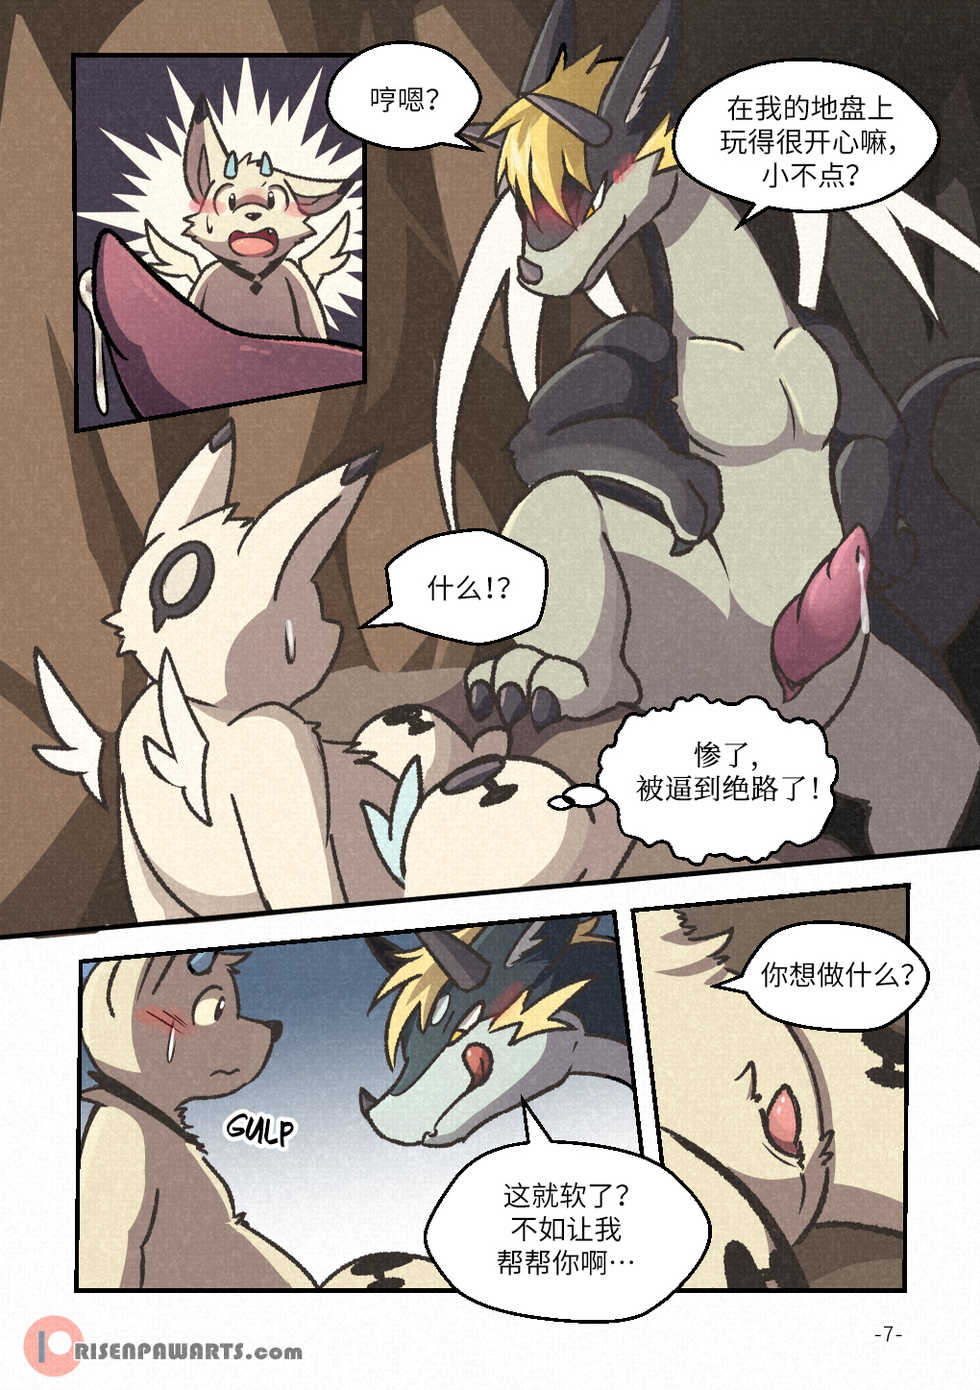 [Risenpaw] Out of Control [Chinese] [悬赏大厅×不可视汉化组] - Page 6